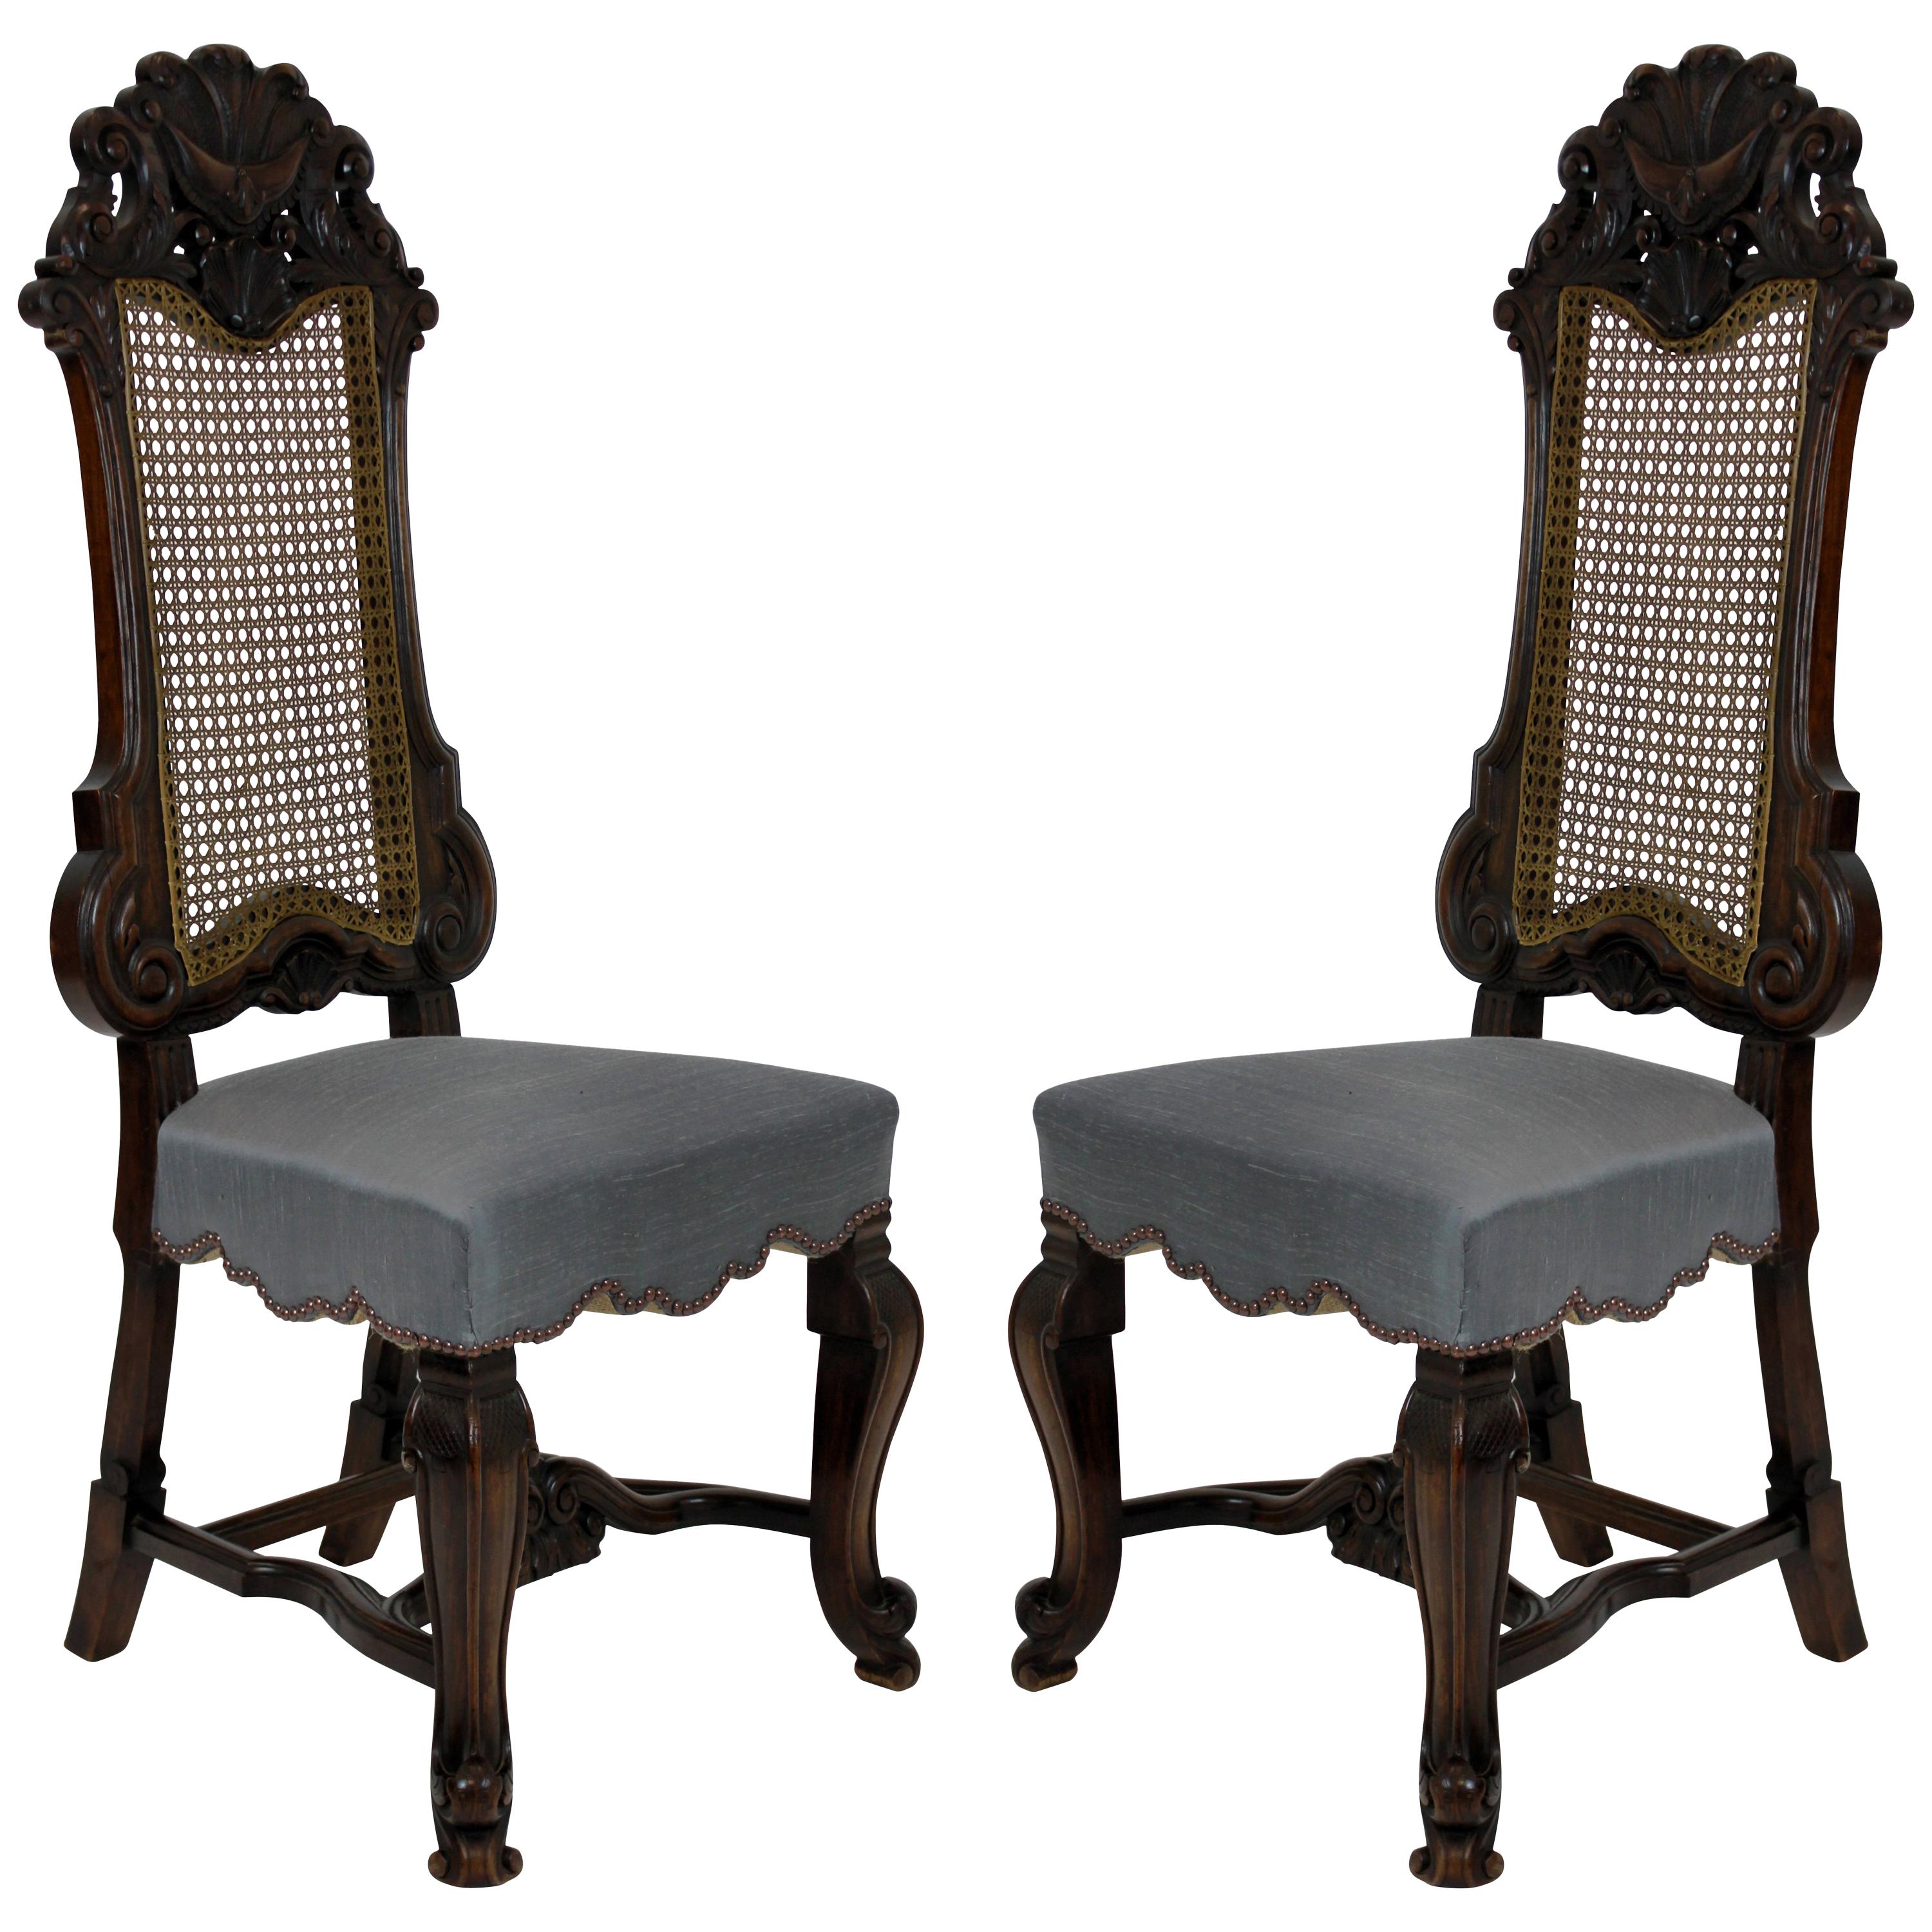 Pair of Fine George Trollope and Sons Hall Chairs